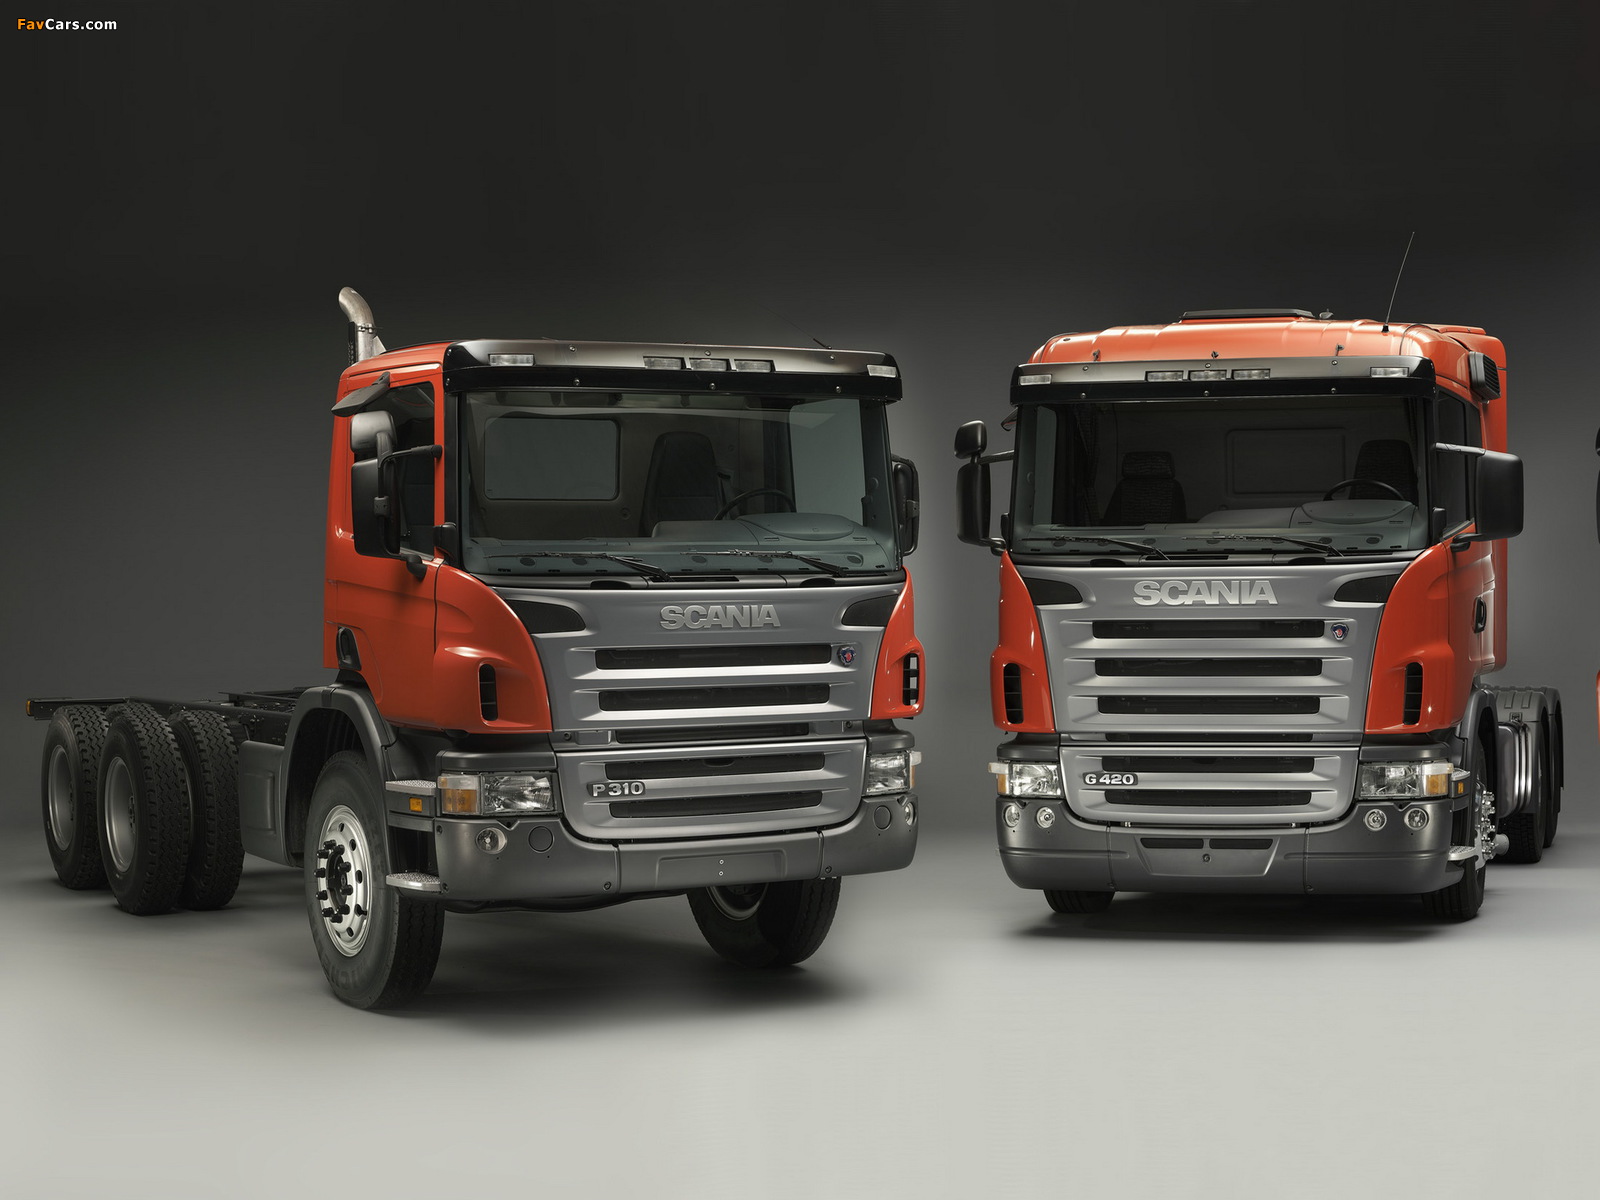 Images of Scania (1600 x 1200)